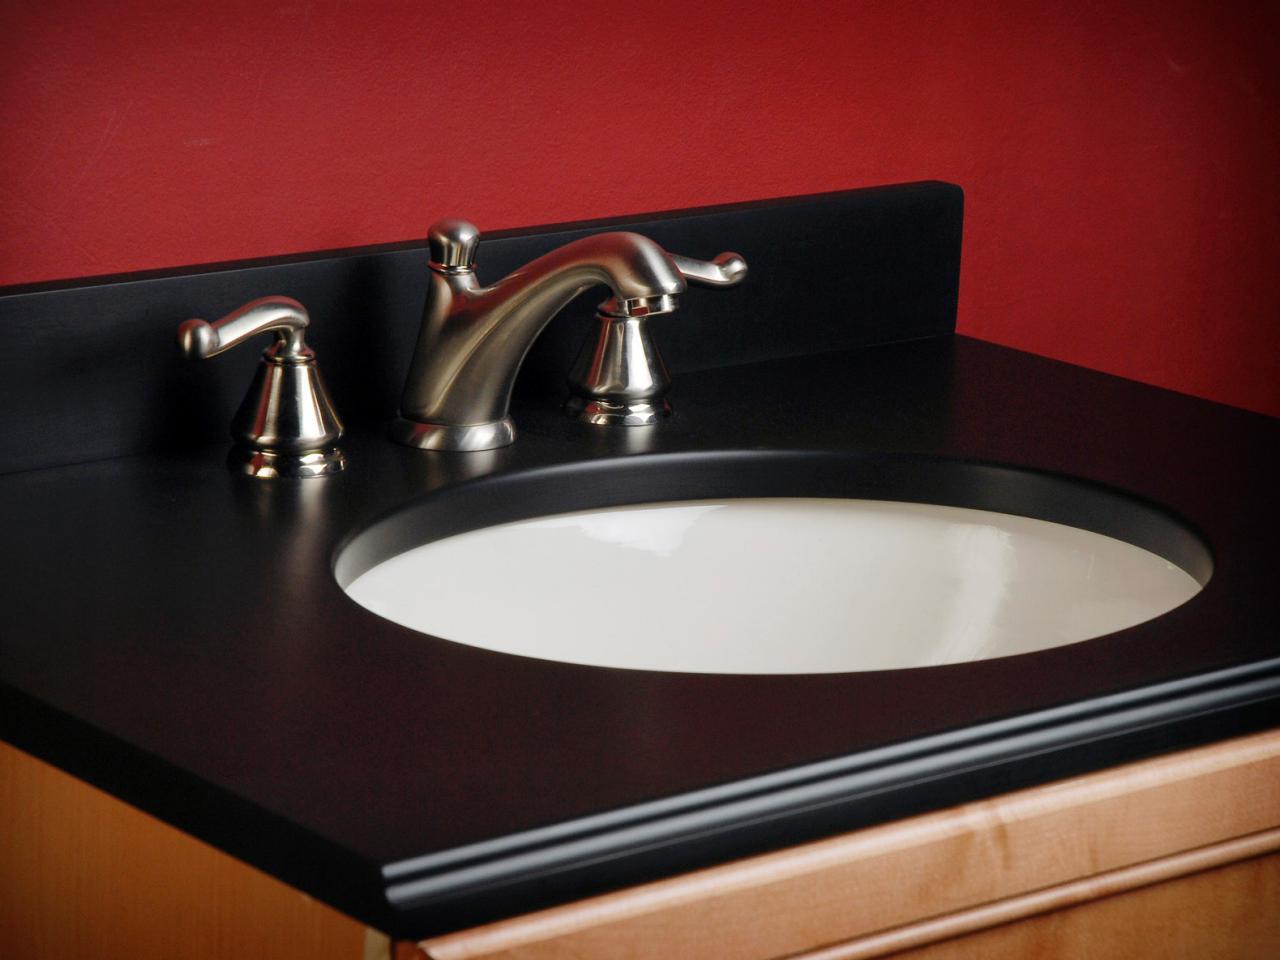 What are some good materials for bathroom sinks and countertops?